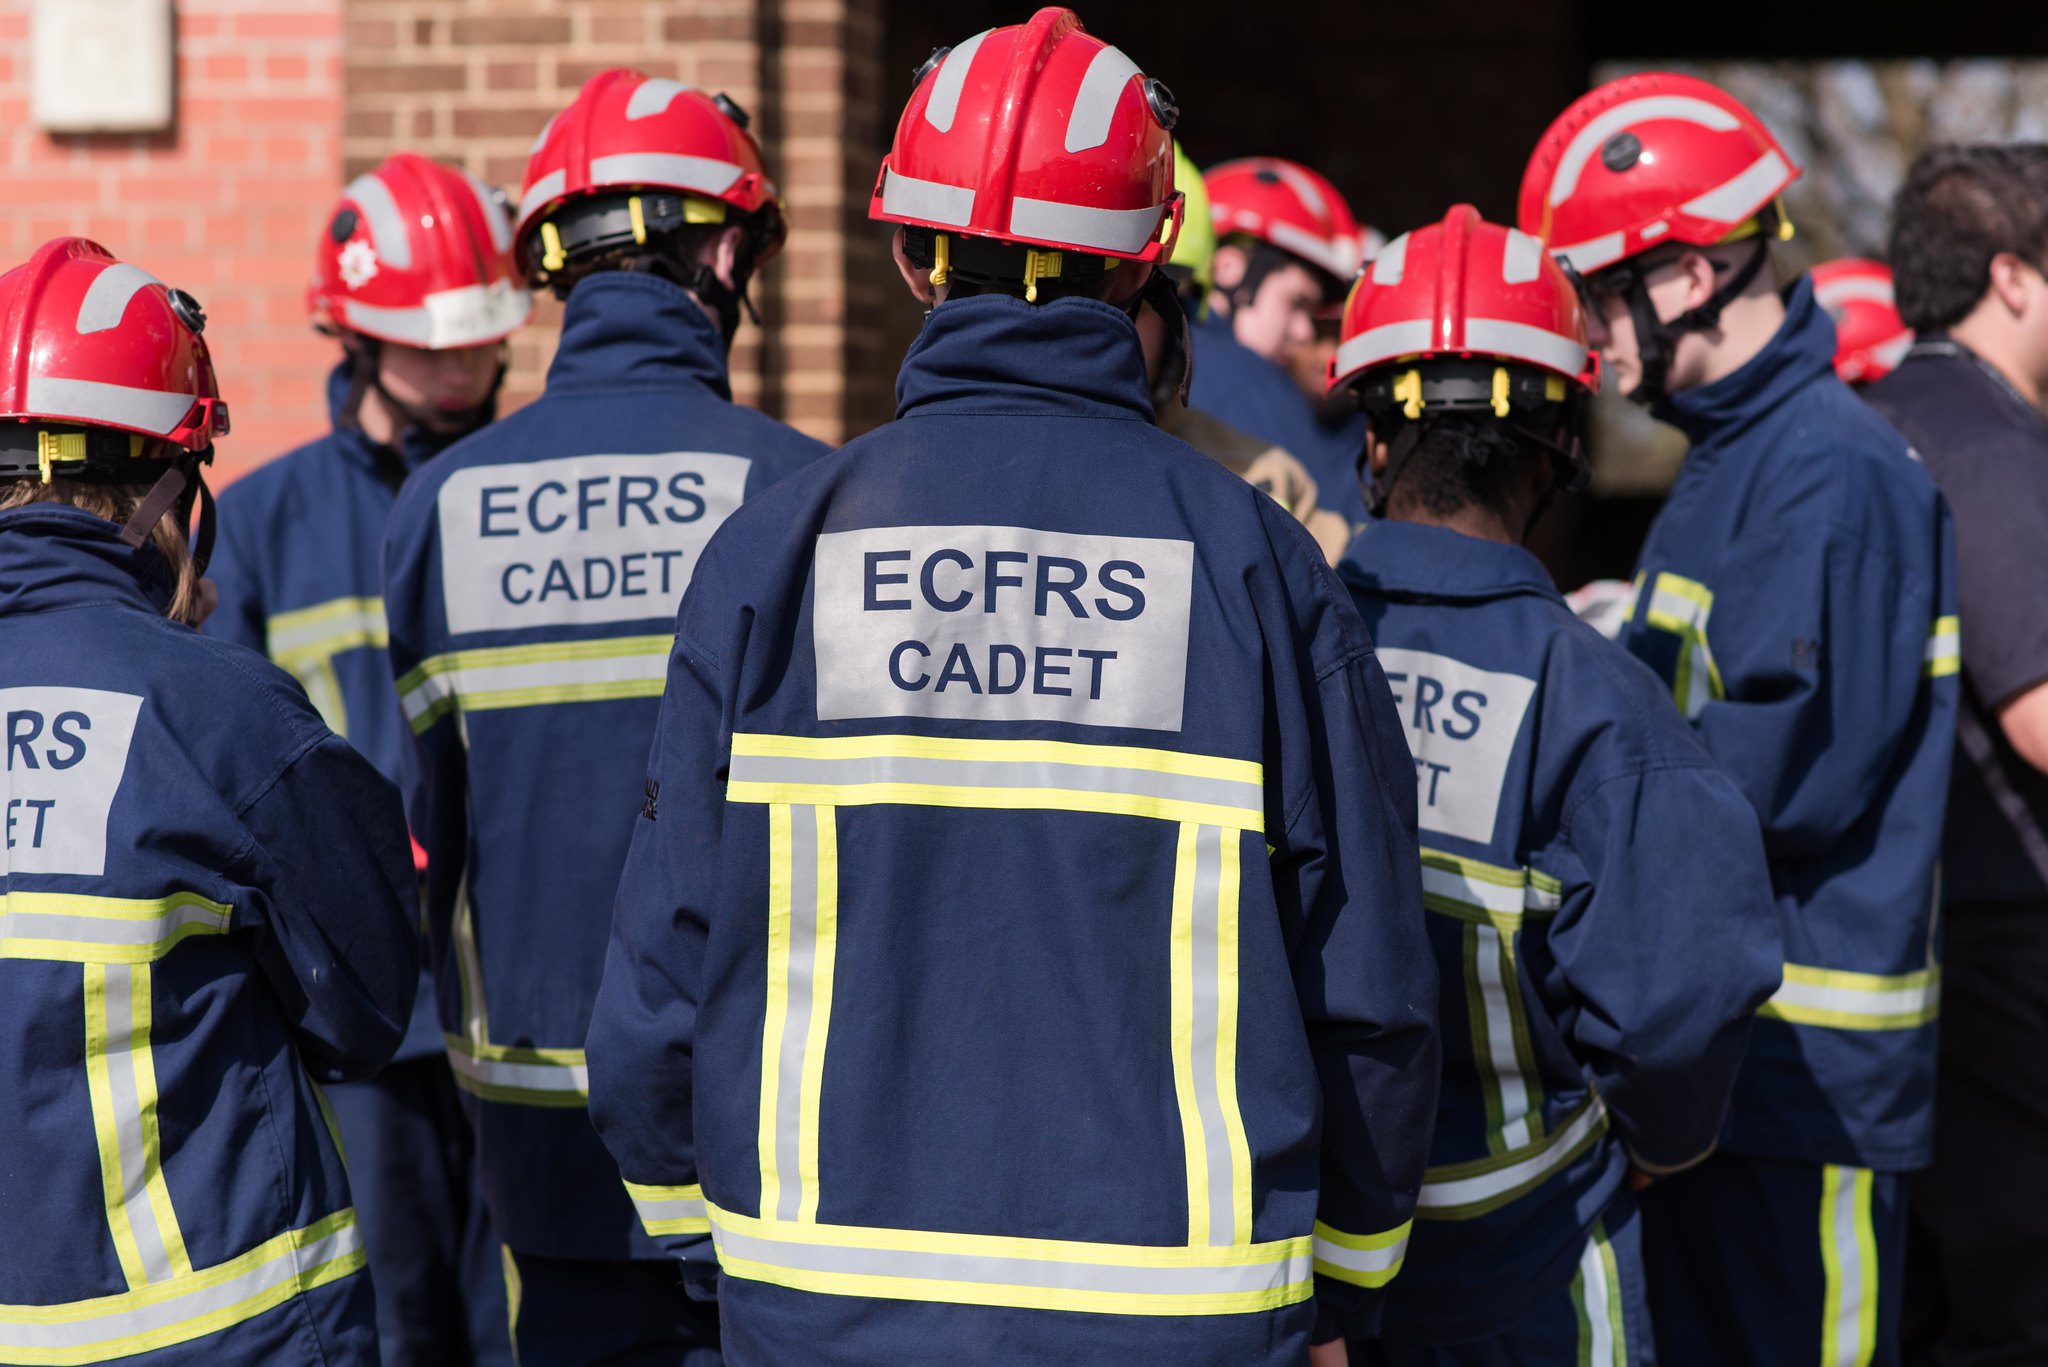 A group of teenage fire cadets pictured from behind, wearing navy PPE and red helmets